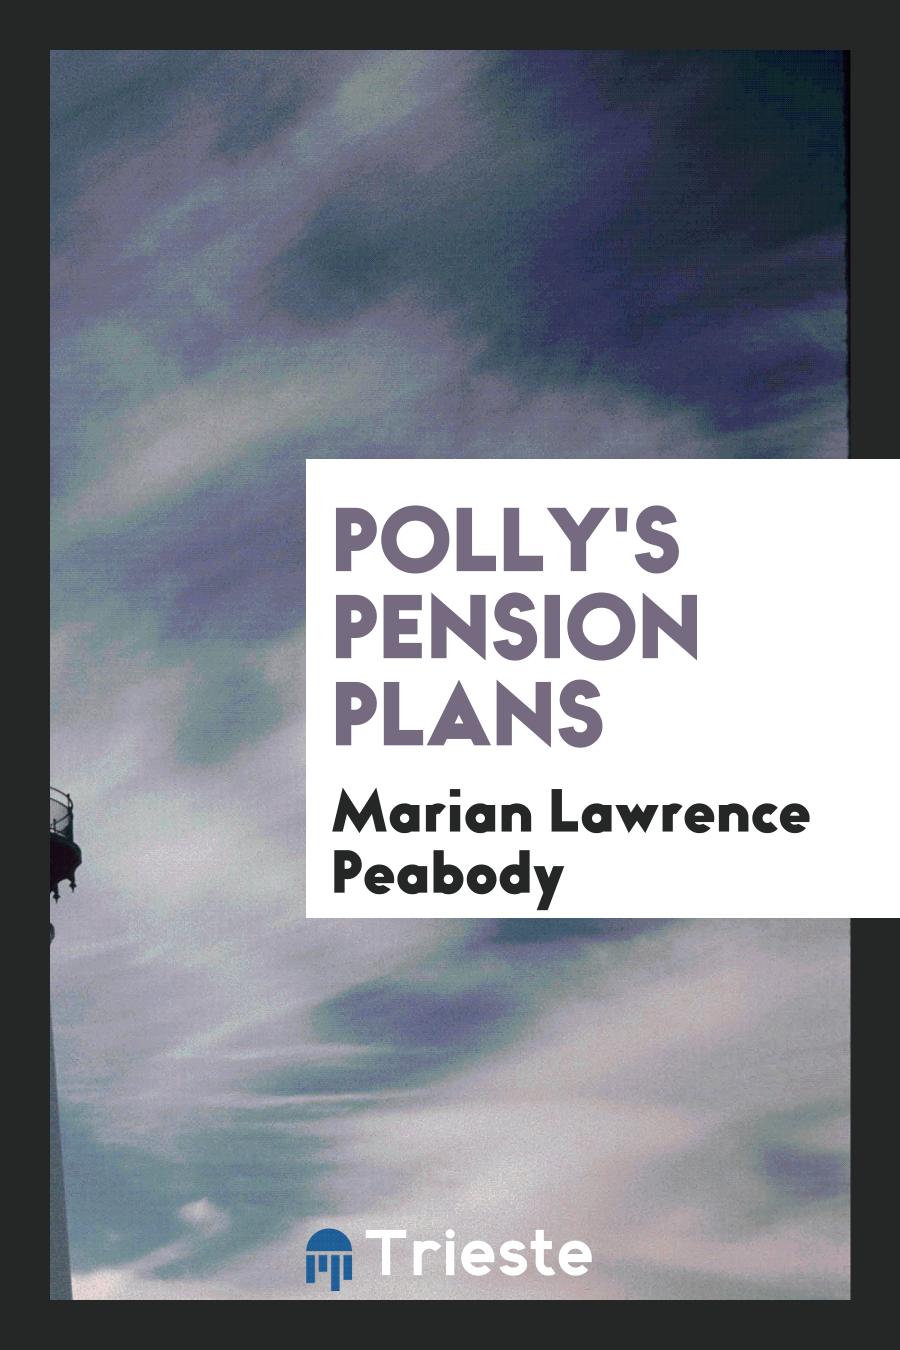 Polly's Pension Plans